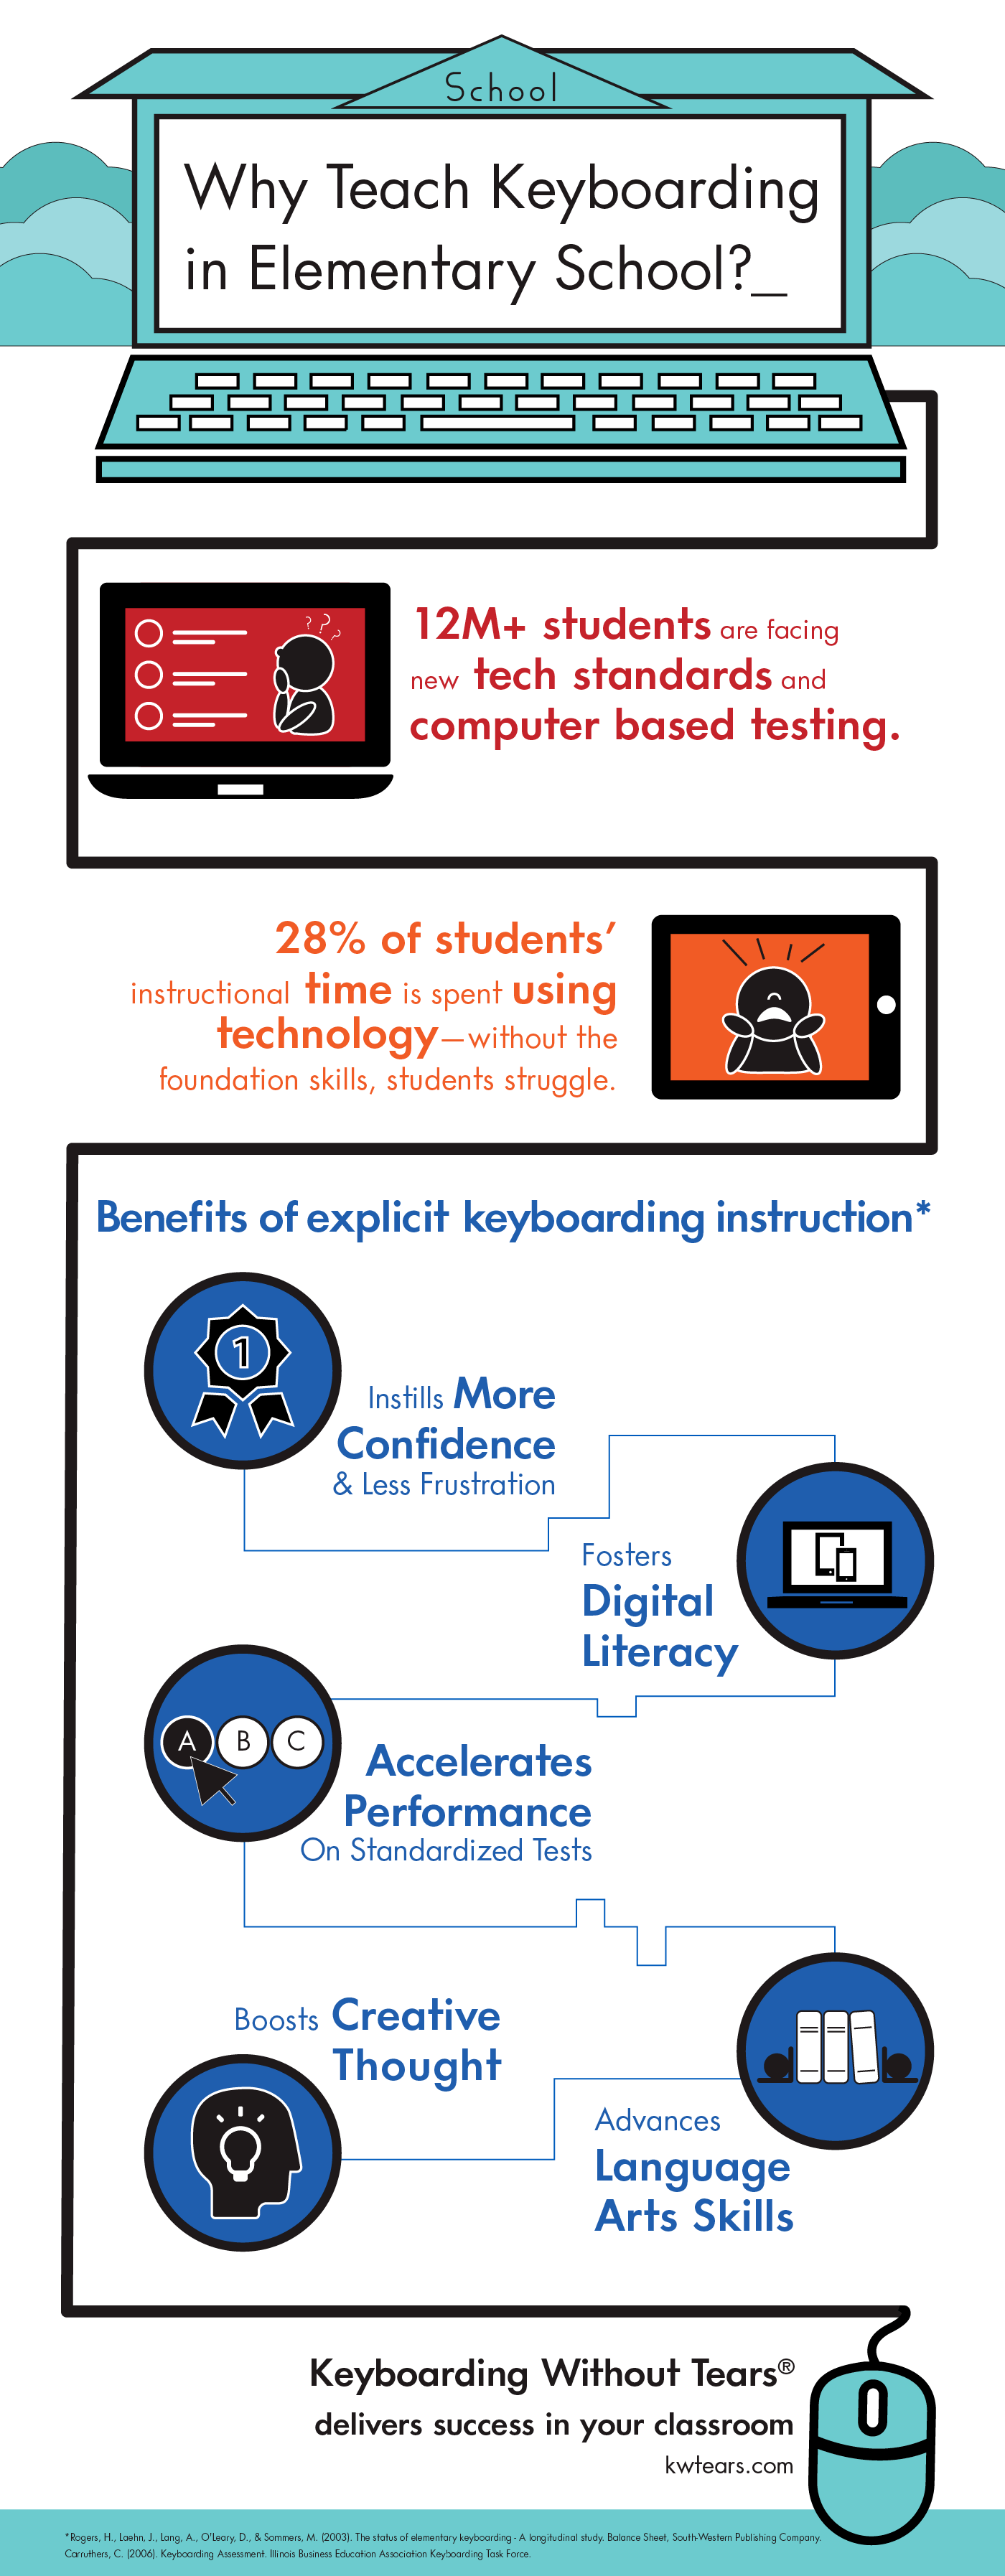 Why Teach Keyboarding in Elementary School Infographic